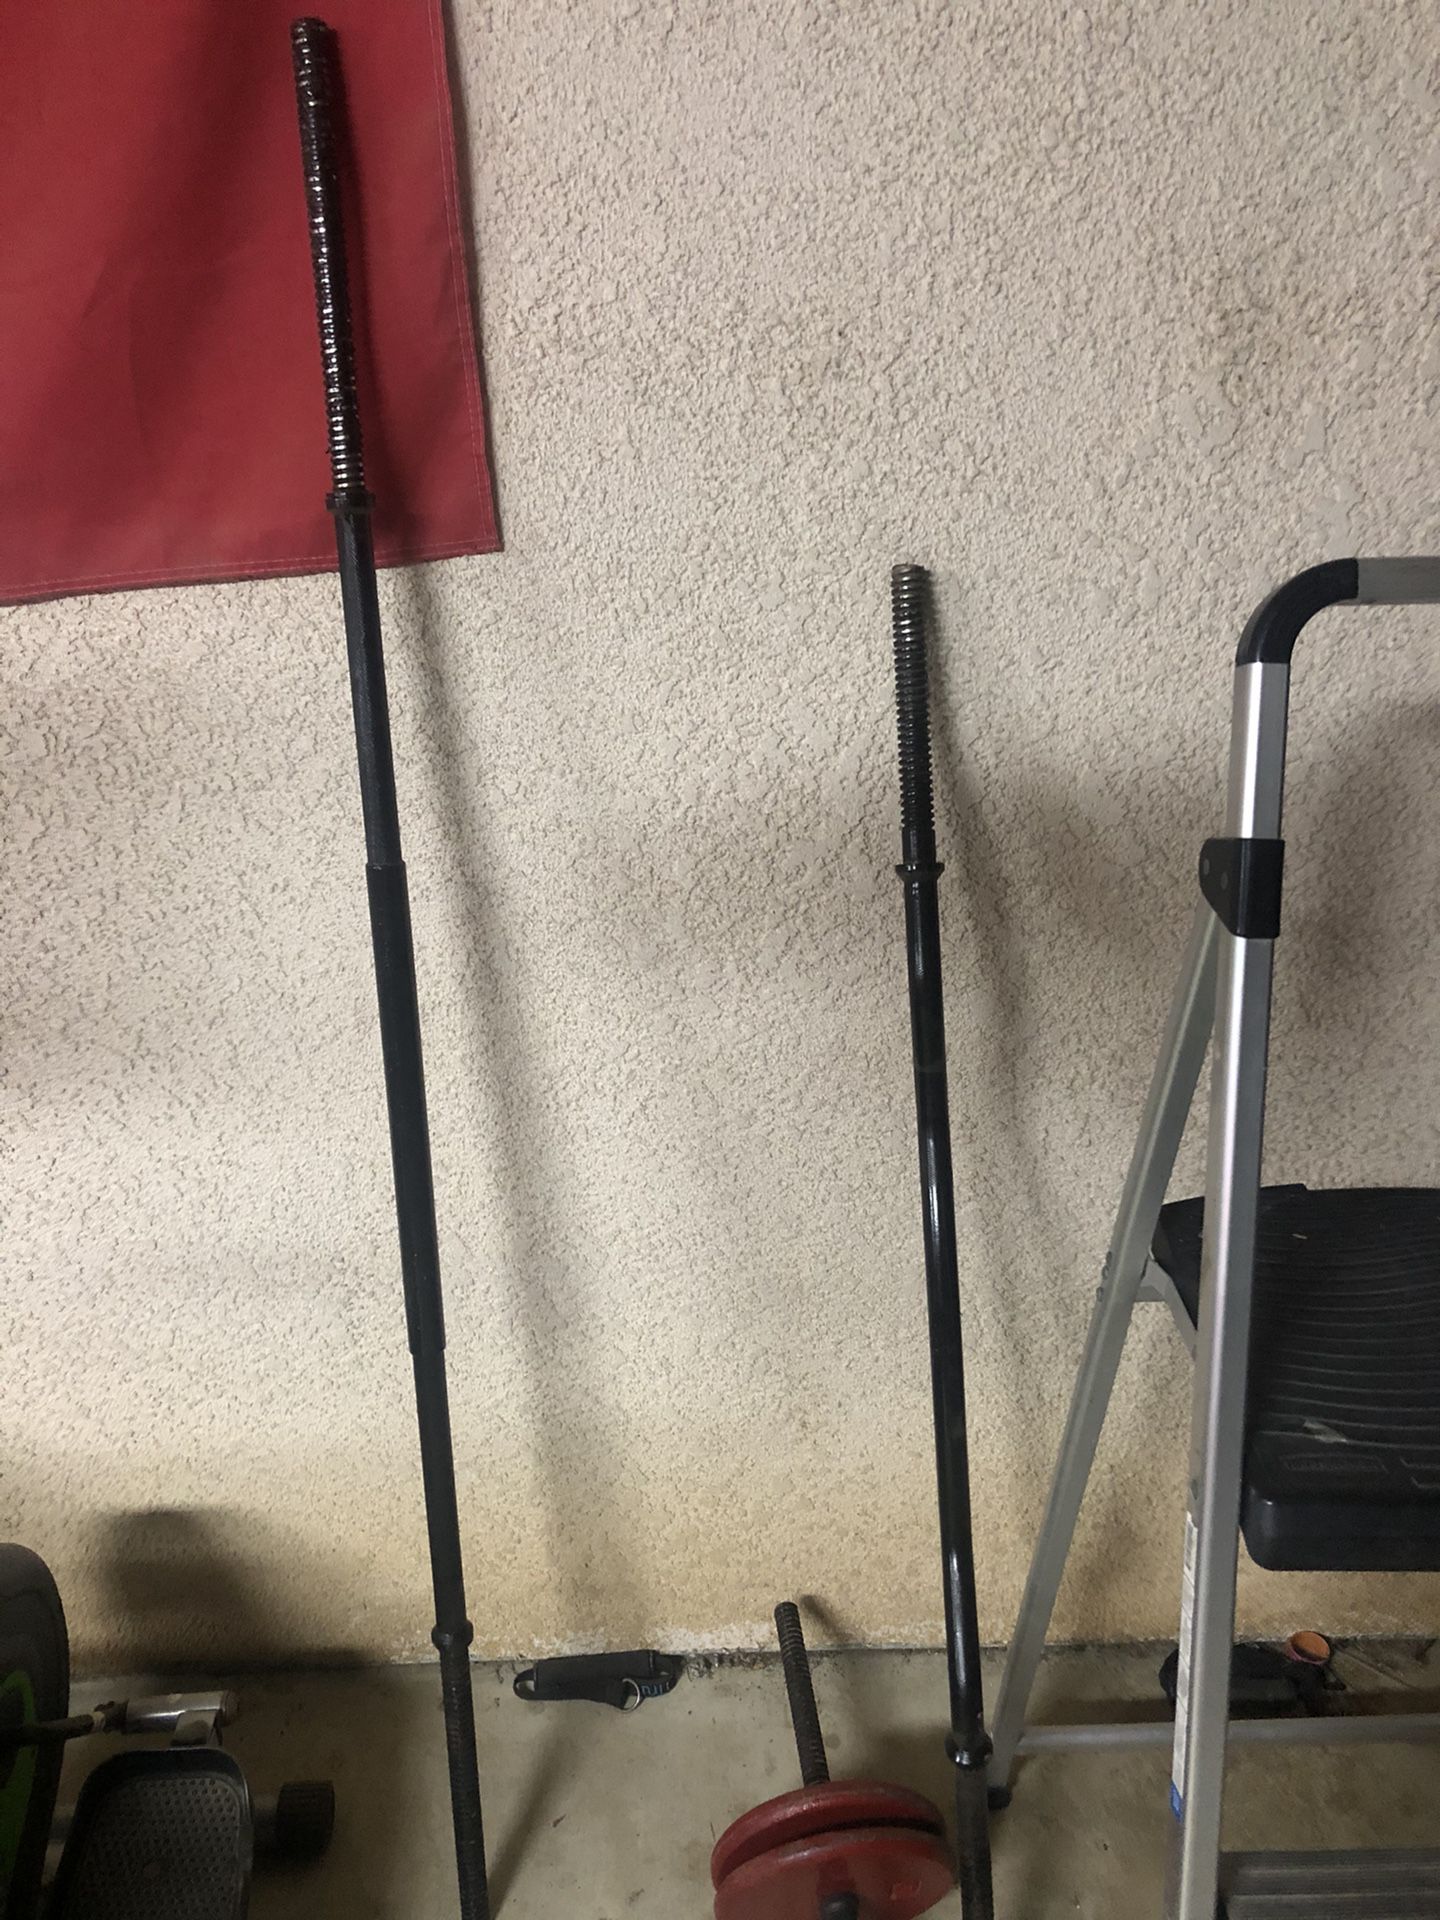 Two Standard Bars For Sale, One Is a Regular Bar And The Other Is A Curl Bar